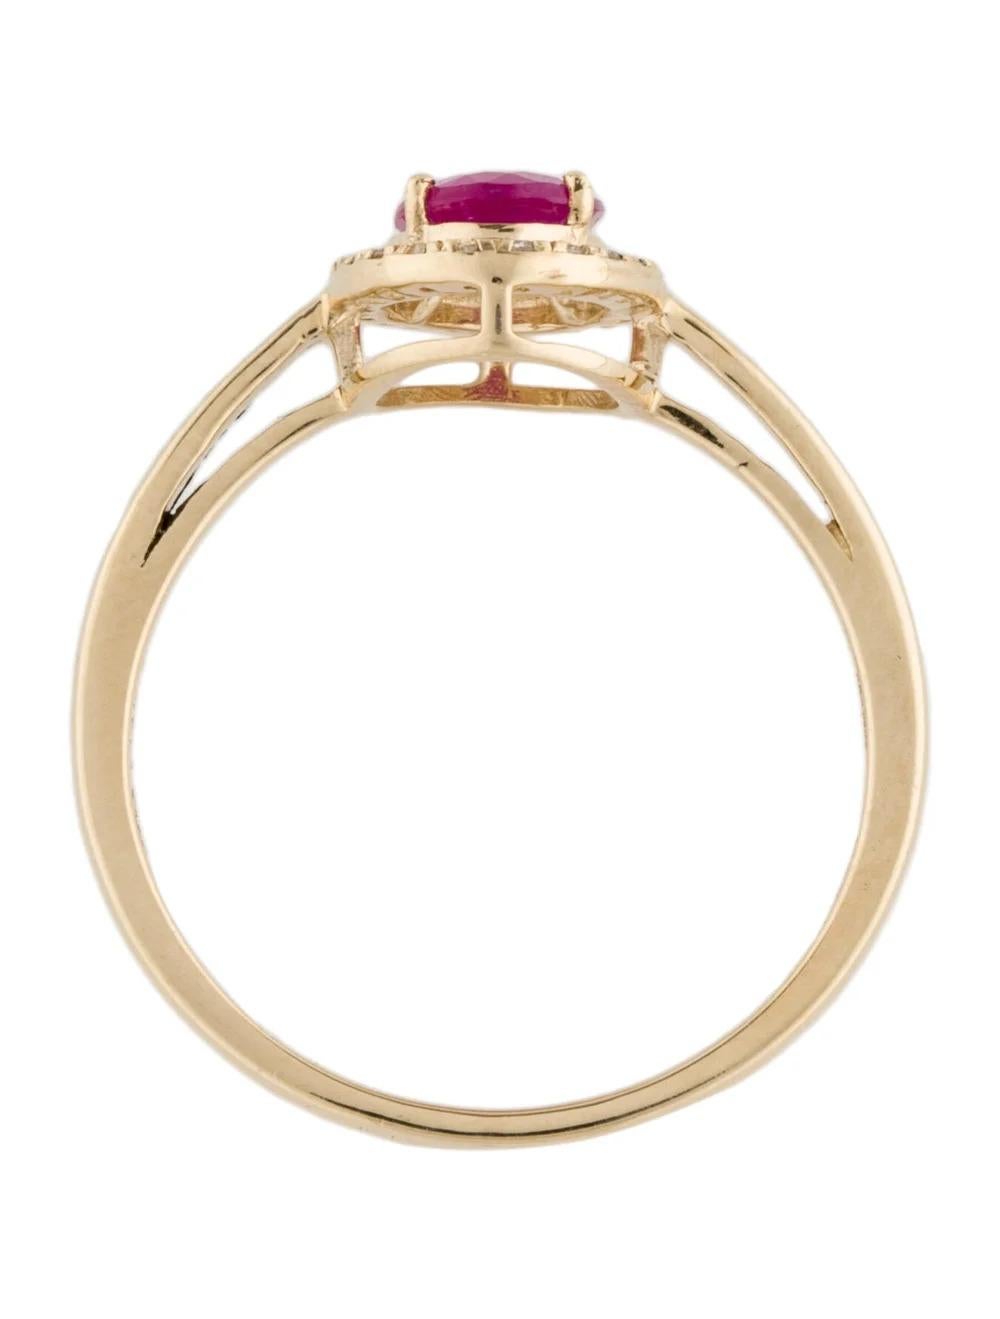 Women's 14K Ruby & Diamond Cocktail Ring, Size 7 - Vintage Style, Statement Jewelry For Sale